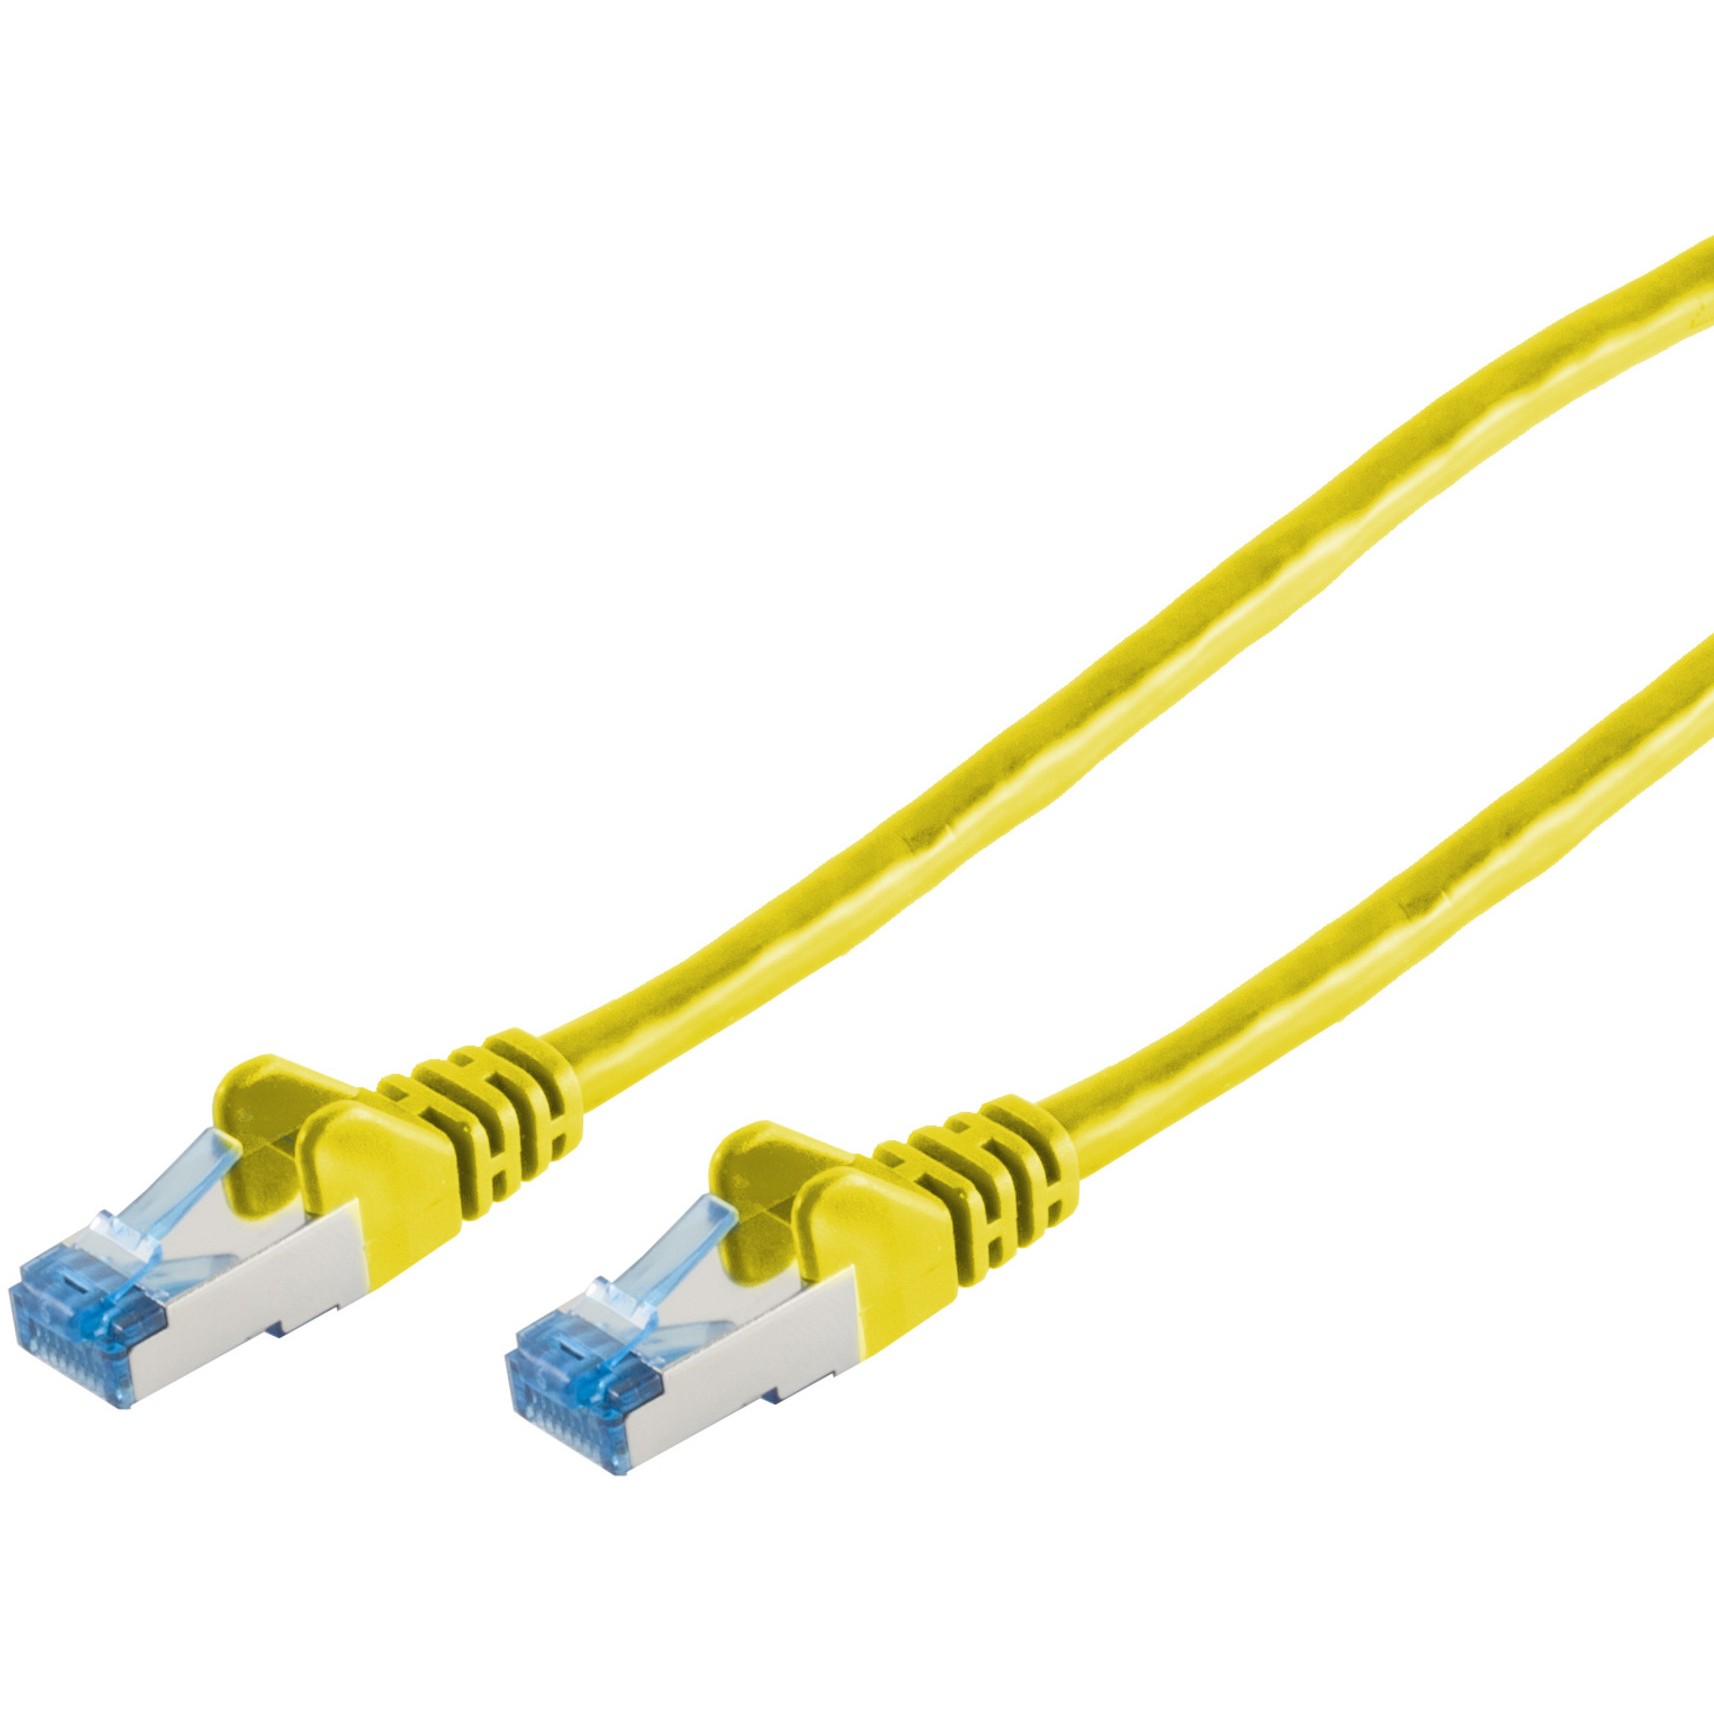 S-Conn 75711-0.25Y networking cable - 75711-0.25Y